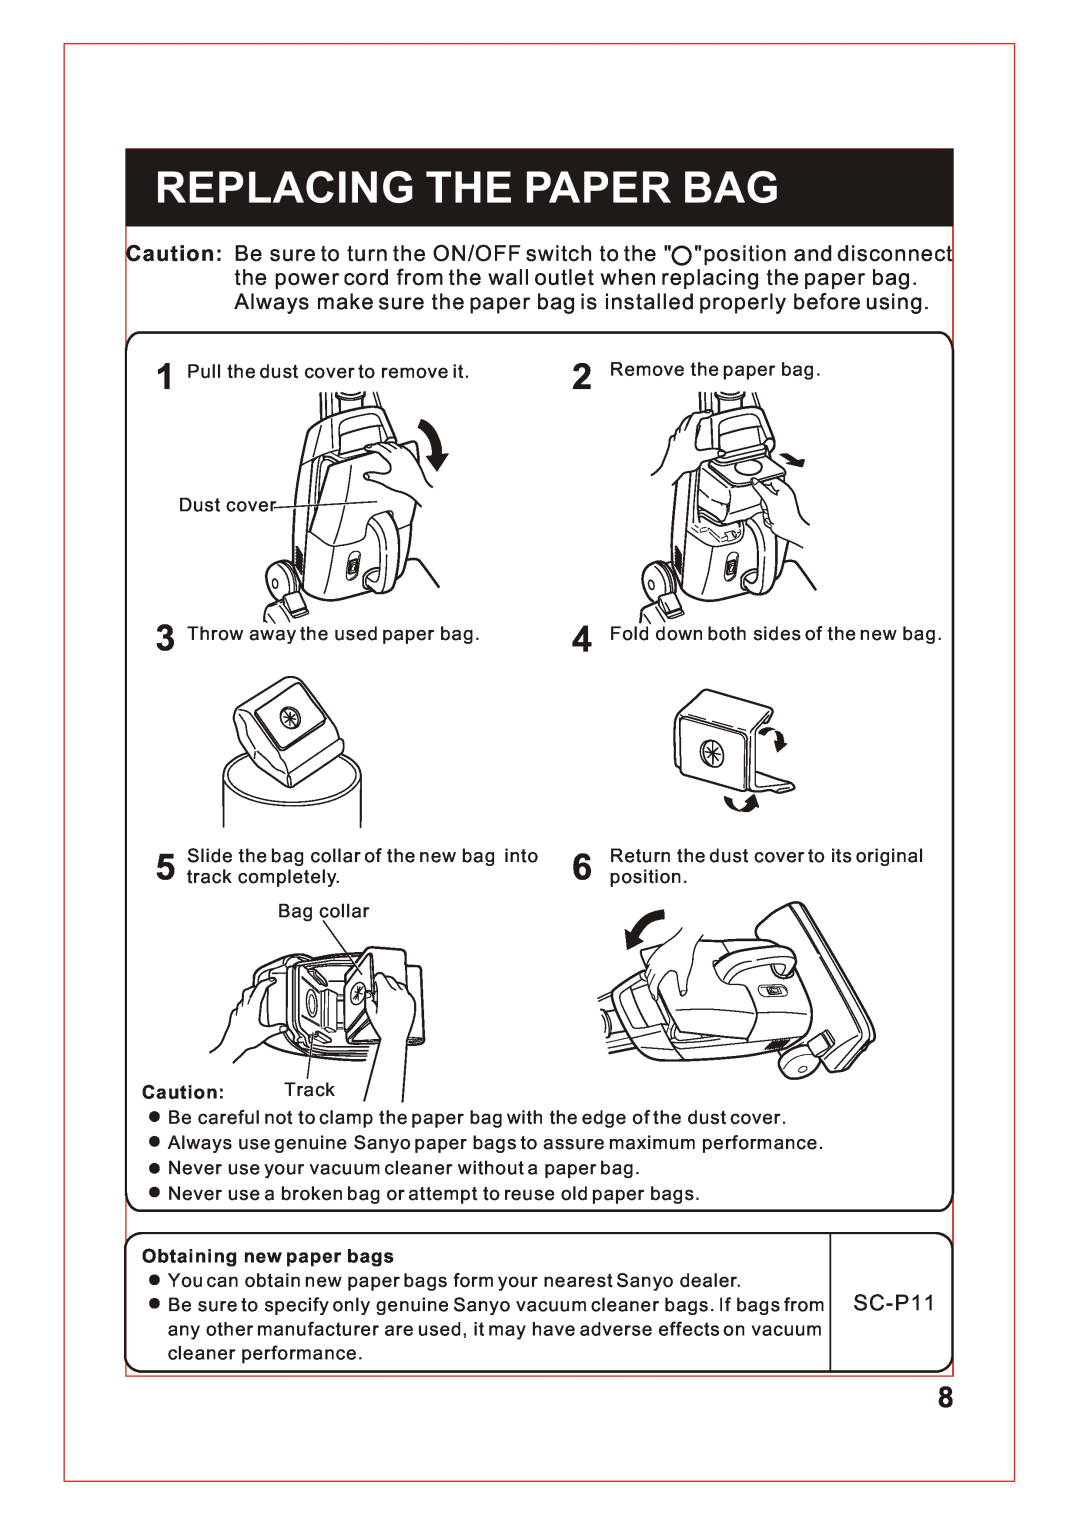 Sanyo SC-150, SC-180 instruction manual Replacing The Paper Bag, SC-P11, Caution Track, Obtaining new paper bags 